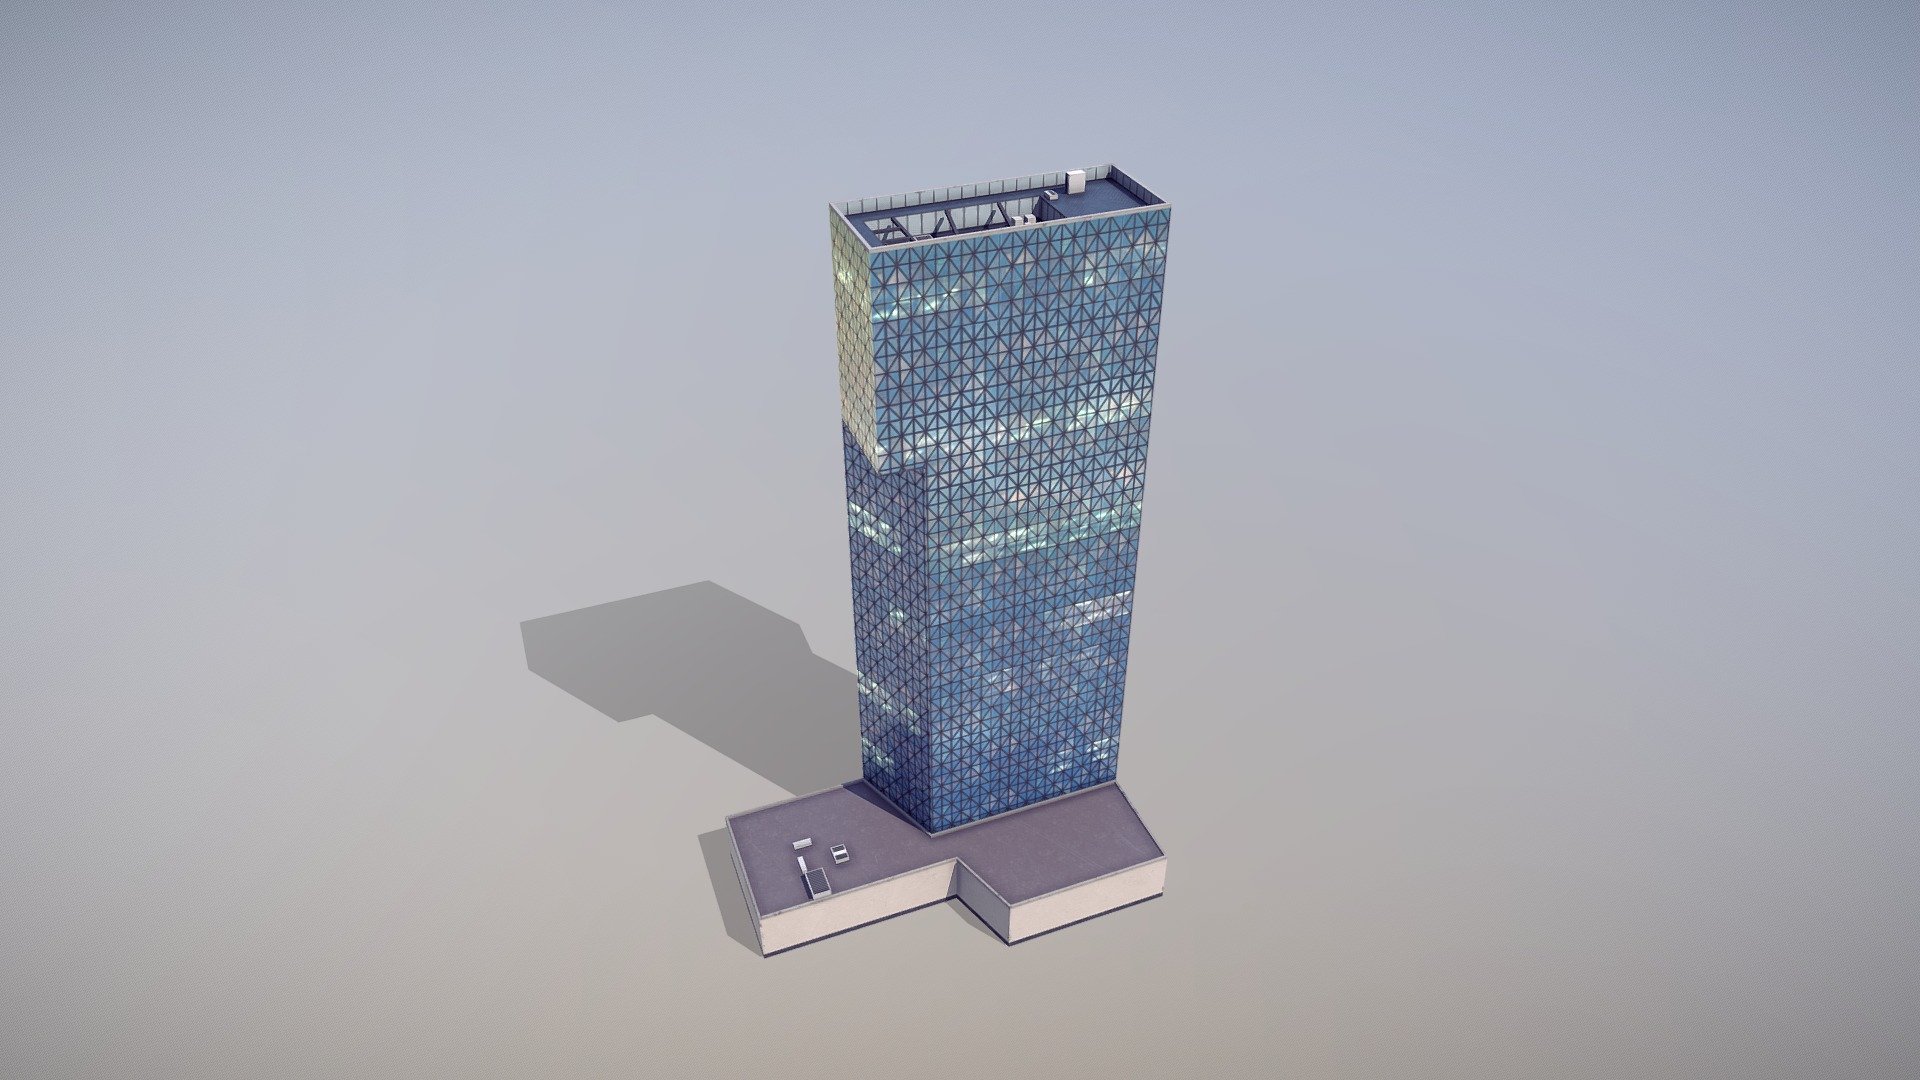 Arlanda Victoria Tower




LOD0 - (triangles 285) / (points 200)

LOD1 - (triangles 103) / (points 56)

LOD2 - (triangles 49) / (points 34)

Low-poly (game-ready) 3D model Building with LODs




Textures for PBR shader (Albedo, AmbietOcclusion, Gloss, Specular, NormalMap, Emission) they may be used with Unity3D, Unreal Engine. 

All pictures (previews) REALTIME rendering

Textures for NIGHT

Textures for SUMMER and WINTER


Сontains 3 LODs




Textures:




Arlanda_Victoria_Tower_Albedo.png         - 2048x2048

Arlanda_Victoria_Tower_AmbietOcclusion.png        - 2048x2048

Arlanda_Victoria_Tower_Gloss.png          - 2048x2048

Arlanda_Victoria_Tower_Specular.png           - 2048x2048

Arlanda_Victoria_Tower_NormalMap.png          - 2048x2048 


Arlanda_Victoria_Tower_Emission.png           - 2048x2048




Pack for WINTER   





If you have questions about my models or need any kind of help, feel free to contact me and i'll do my best to help you 3d model